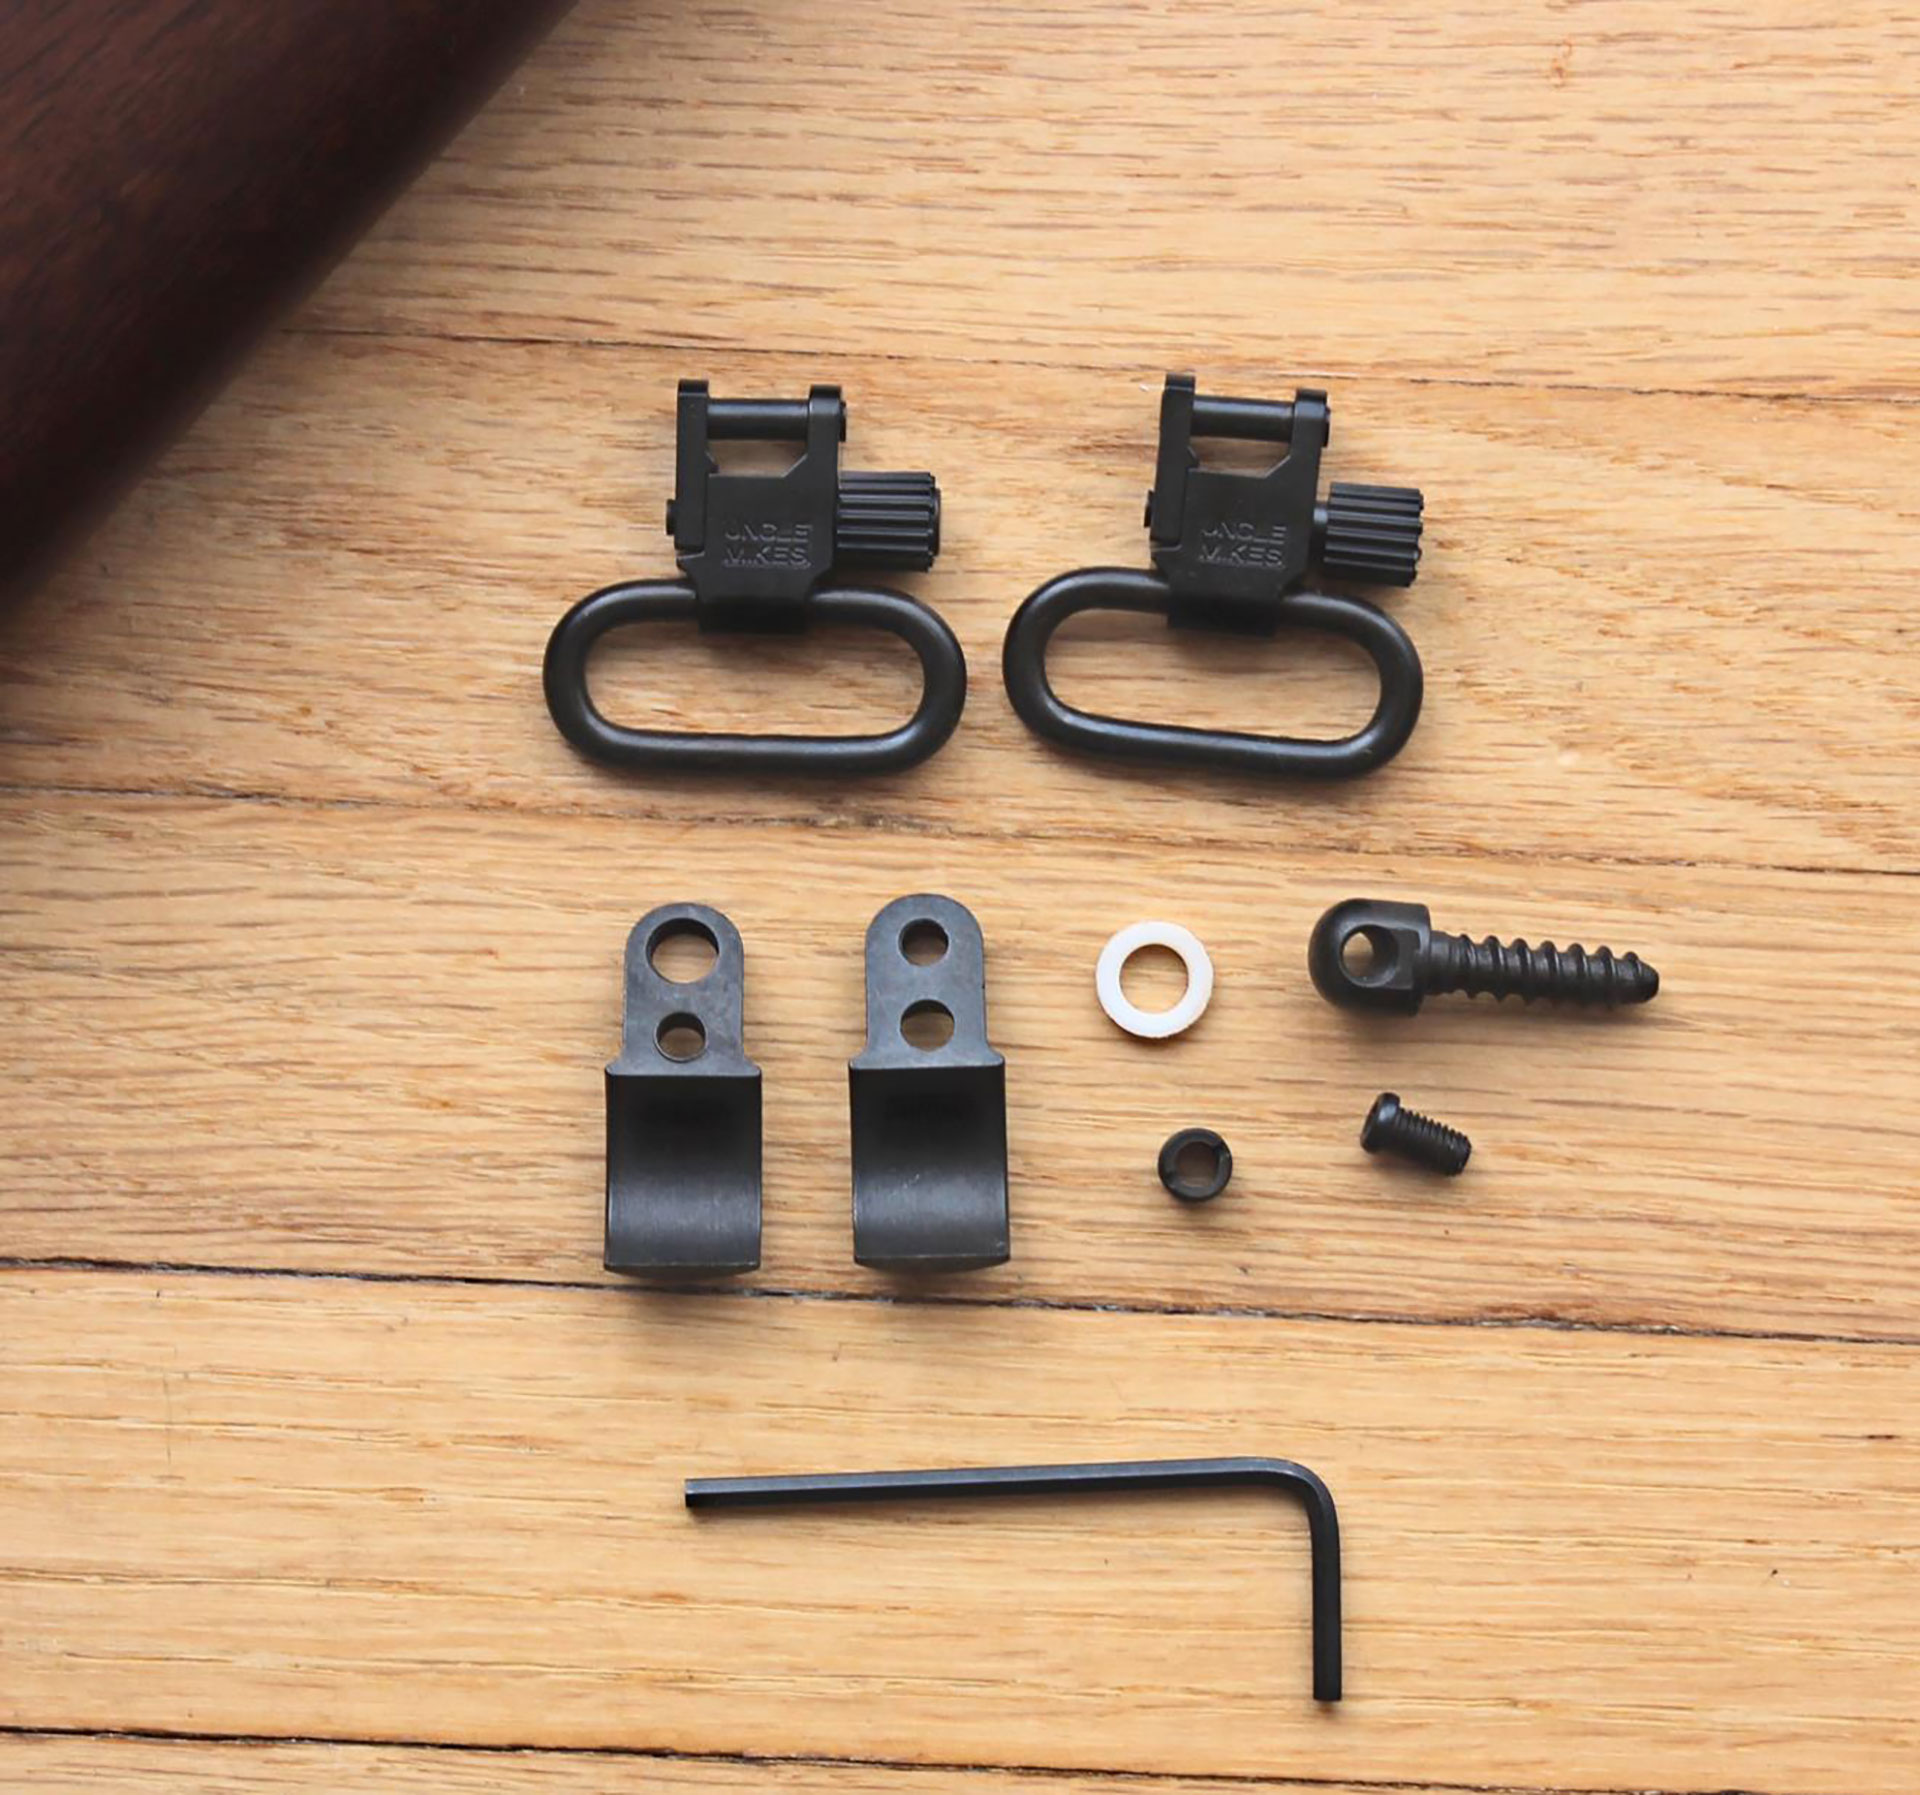 The Uncle Mike’s sling mounting kit includes and Allen key and a pair of 1” sling swivels.